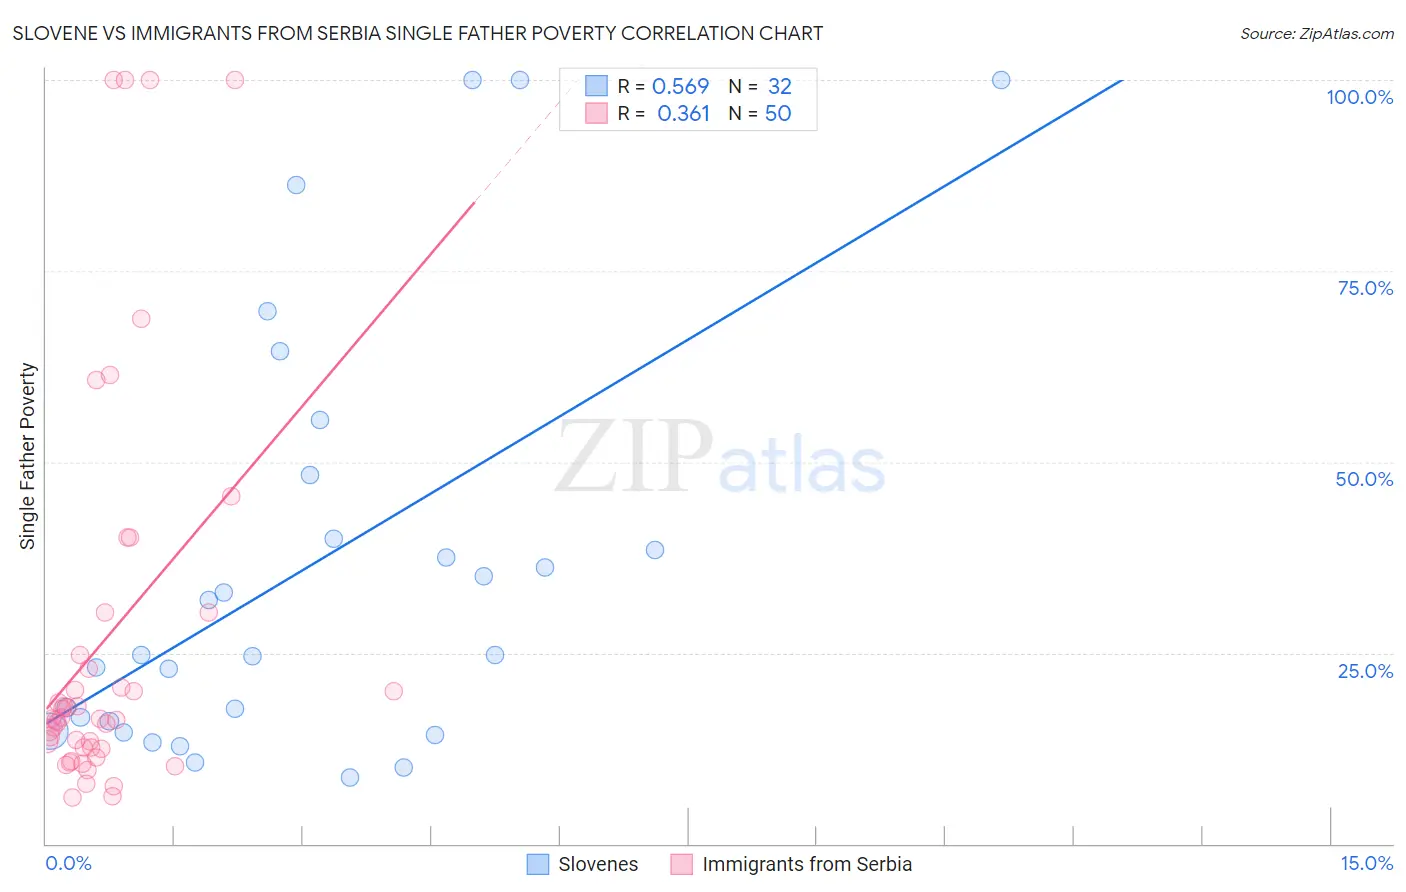 Slovene vs Immigrants from Serbia Single Father Poverty